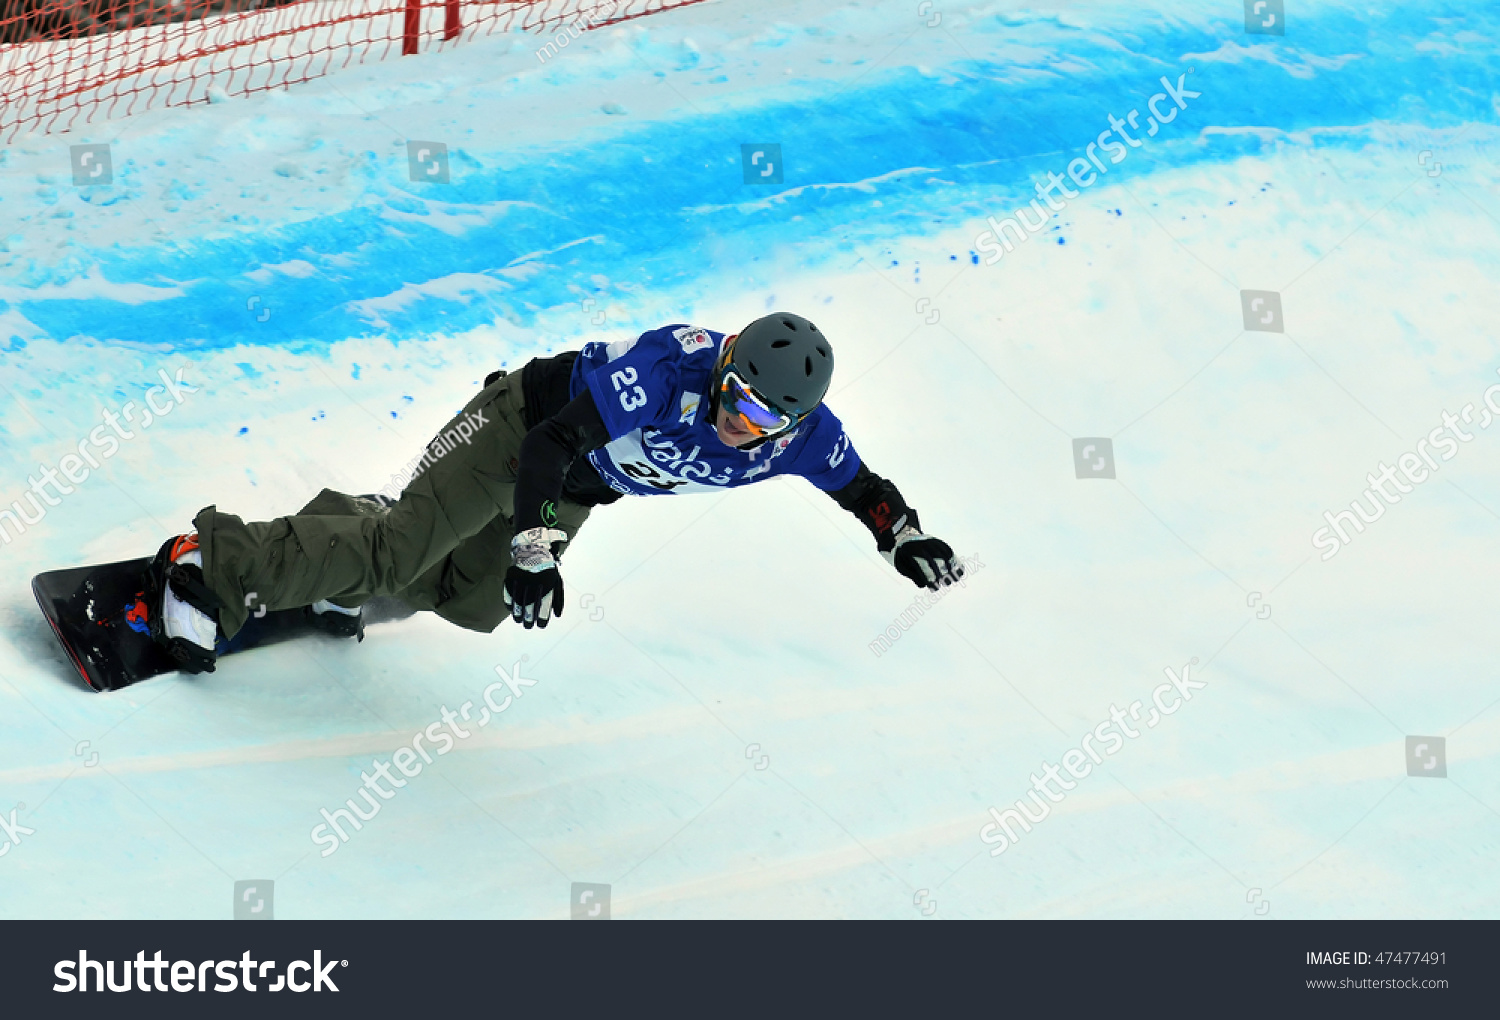 VEYSONNAZ, SWITZERLAND - JANUARY 15: Ladies finalist Faye Gulini of the USA competes in the FIS World Championship Snowboard Cross  Finals January 15, 2010 in Veysonnaz, Switzerland. #47477491